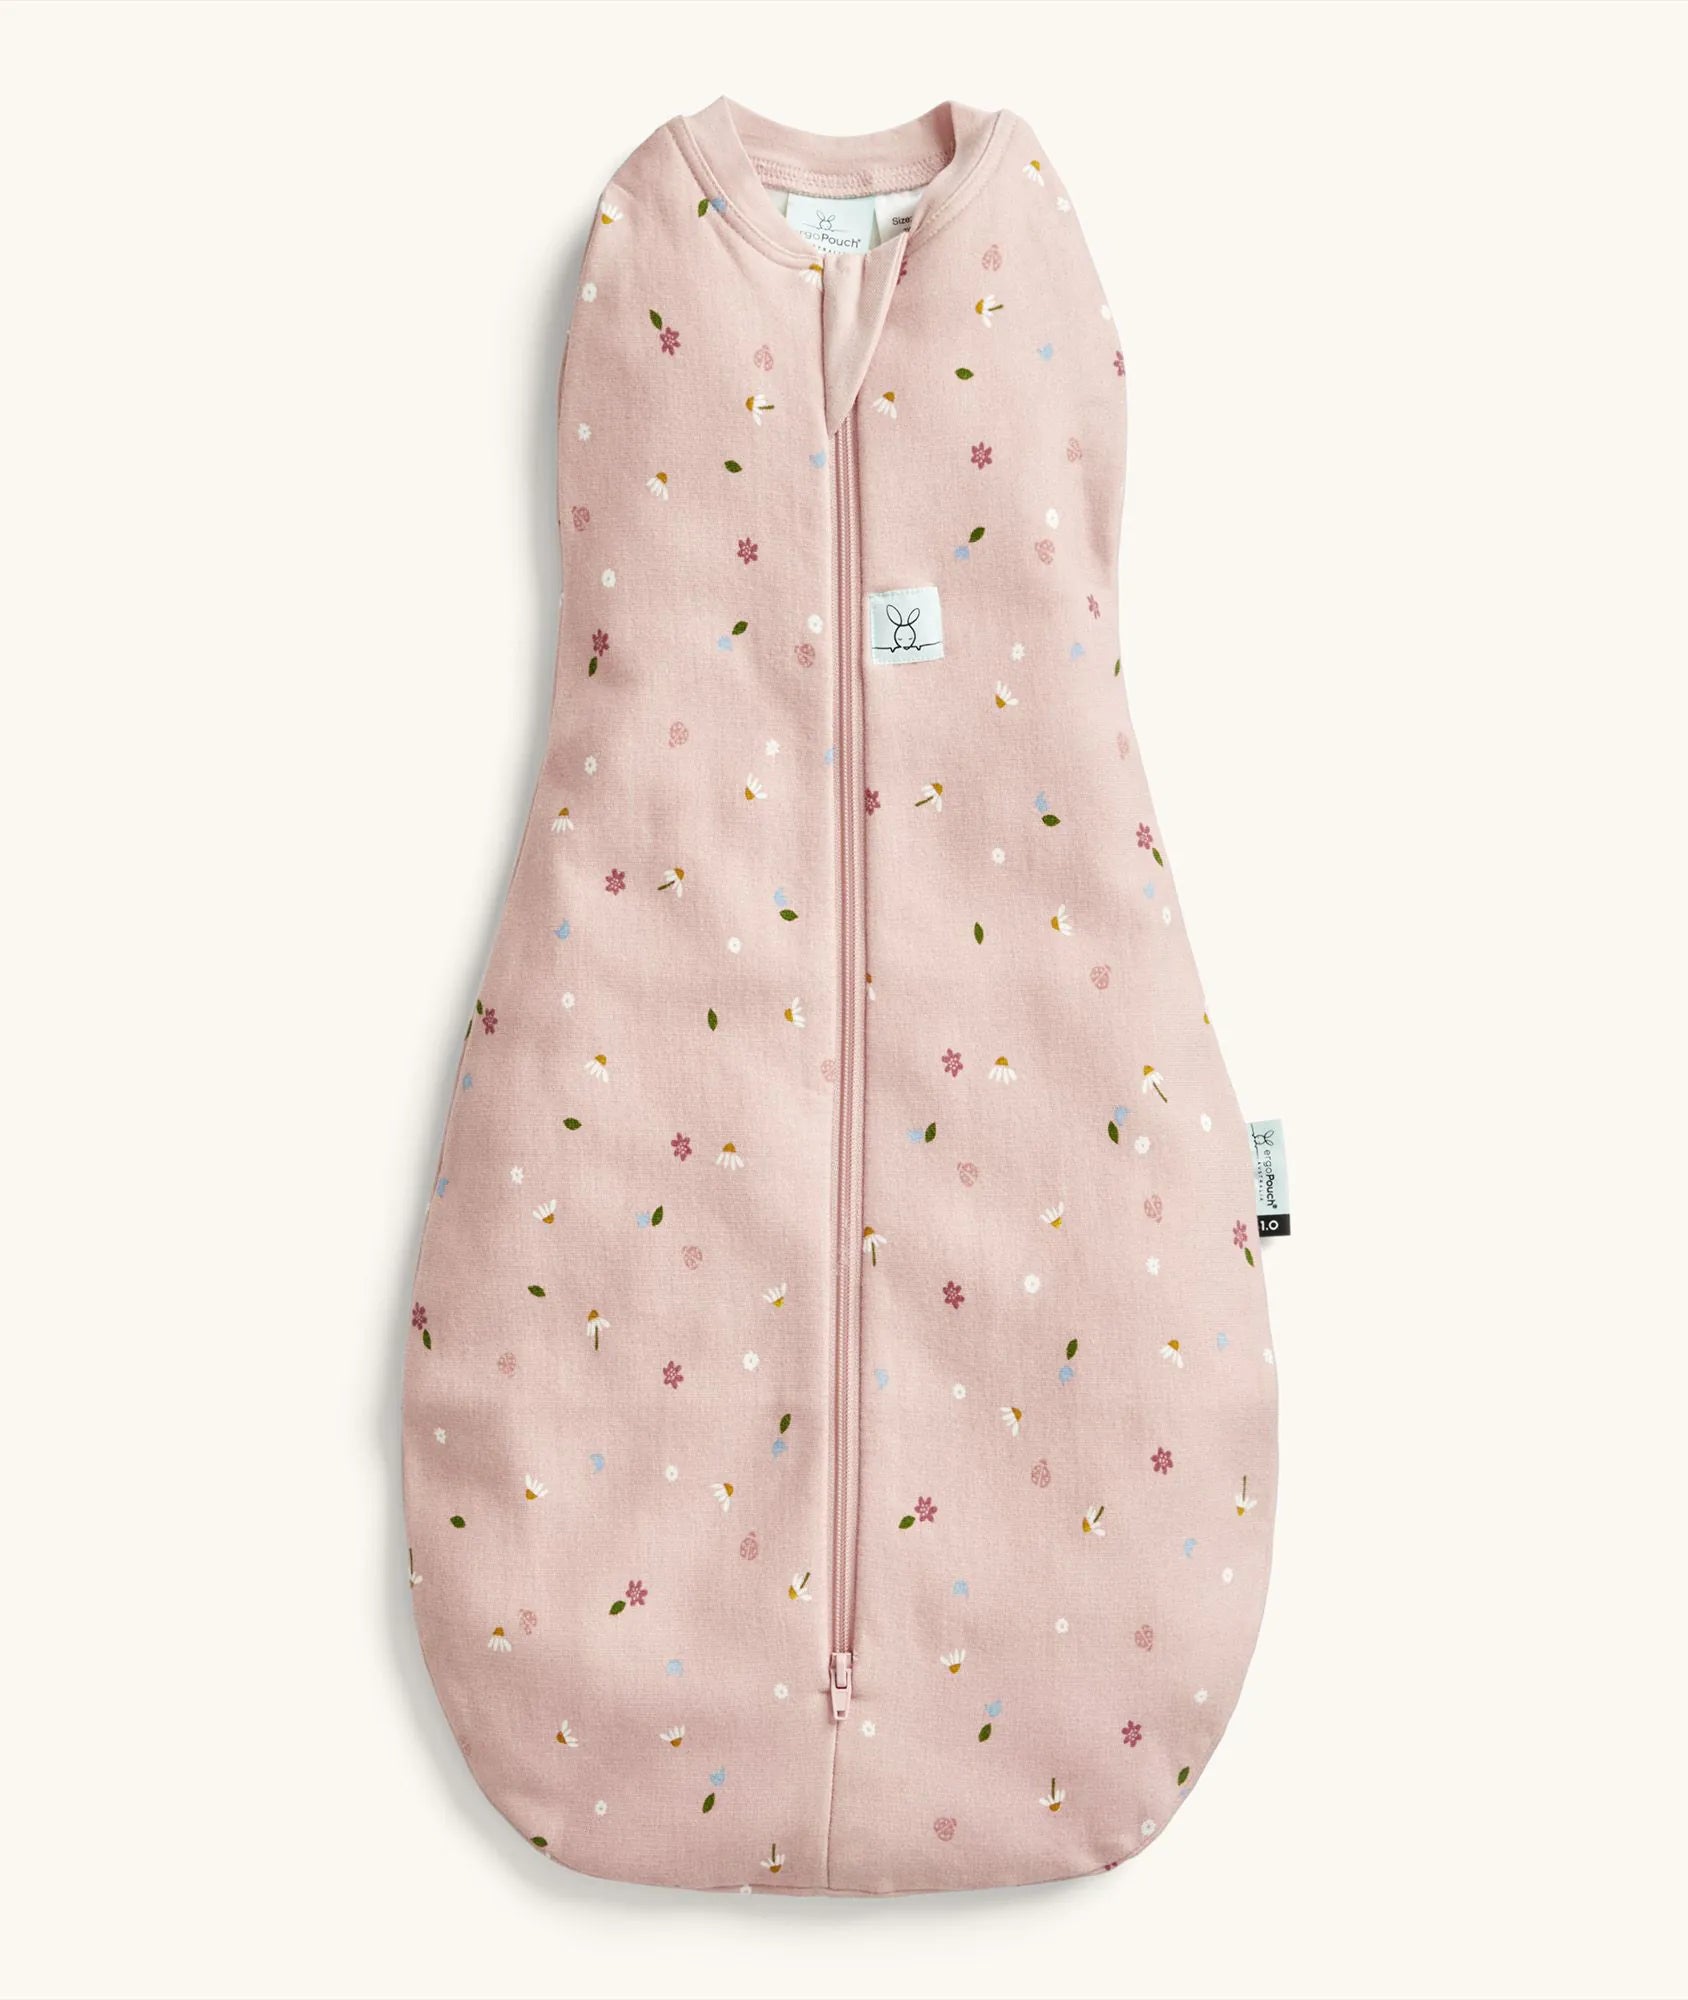 ErgoPouch Cocoon Swaddle Sack 1.0 TOG, Daisies